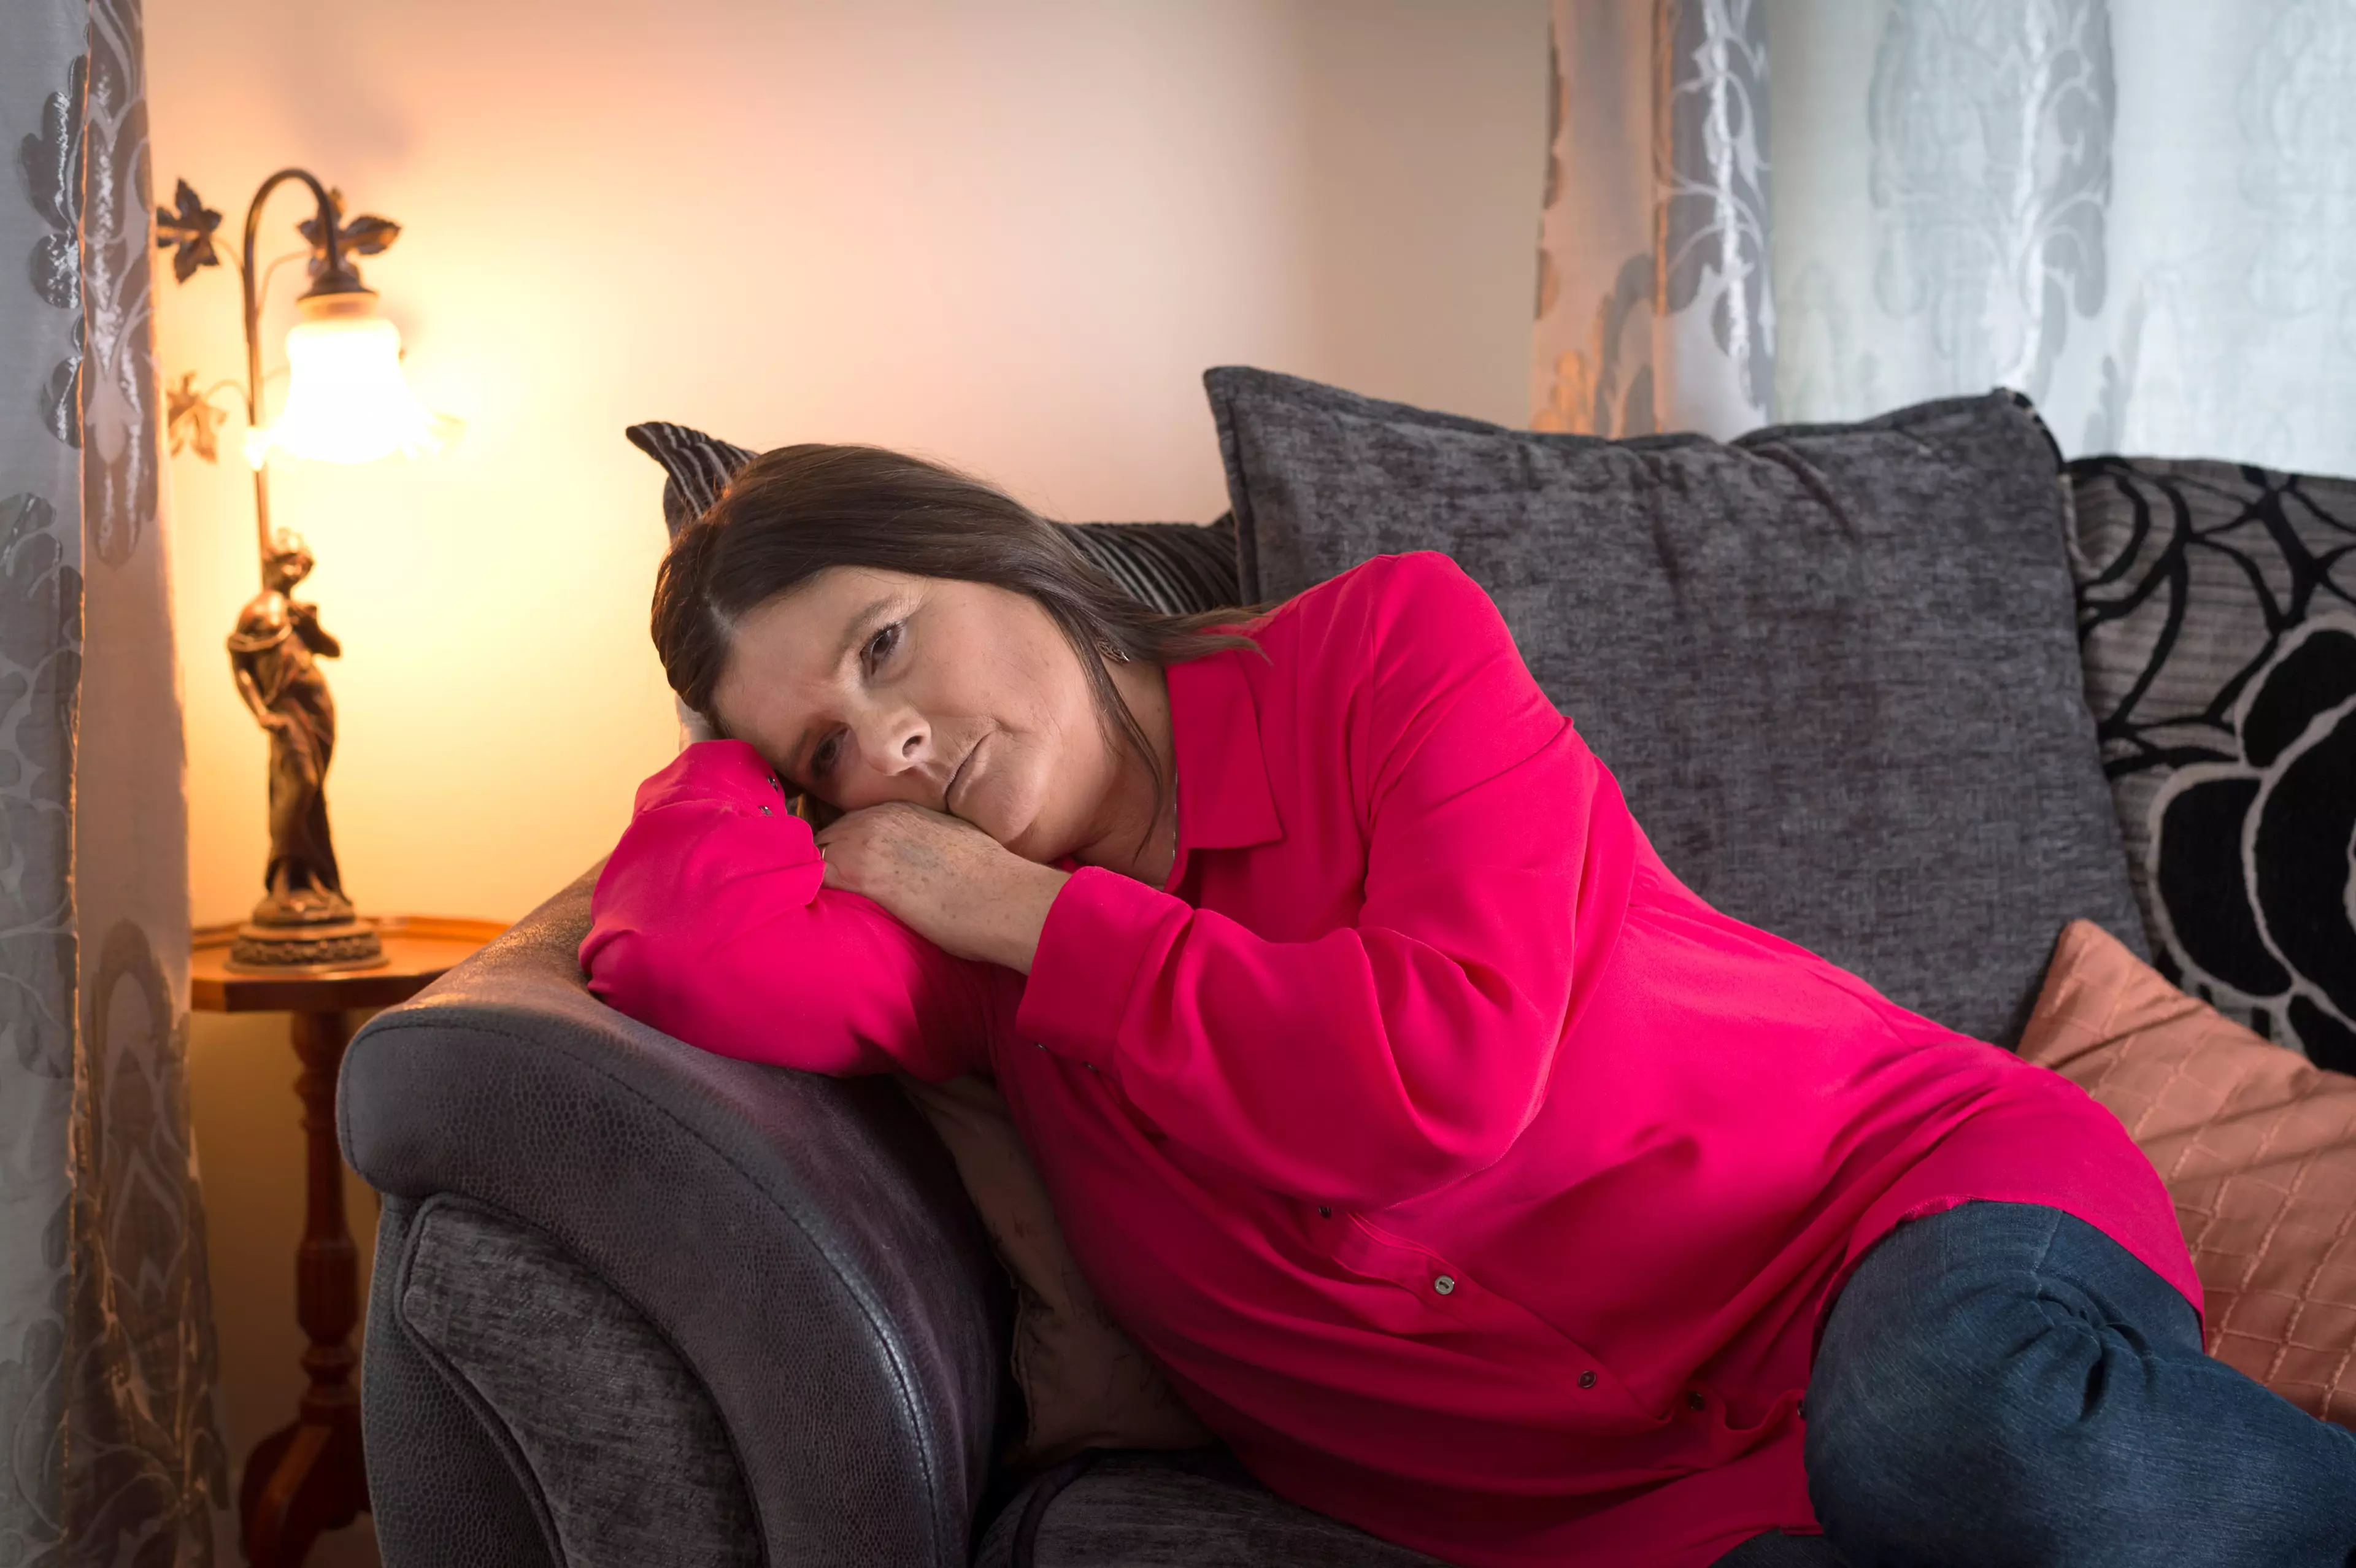 Michele has tried hypnosis, sleeping tablets and even yoga to combat her sleeplessness. (